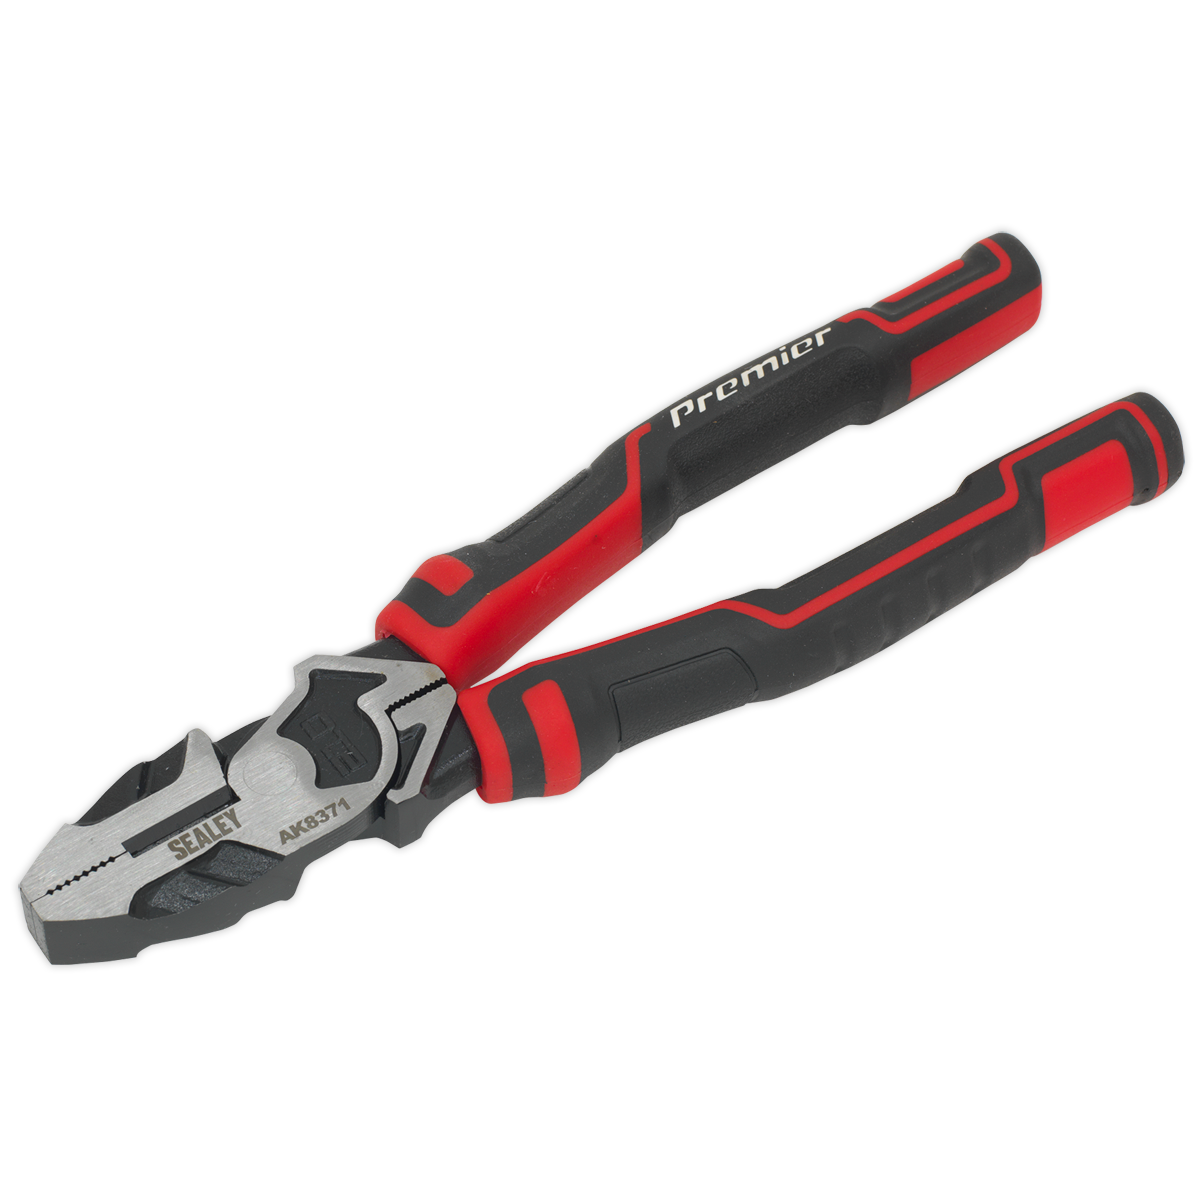 Sealey Combination Pliers High Leverage 200mm